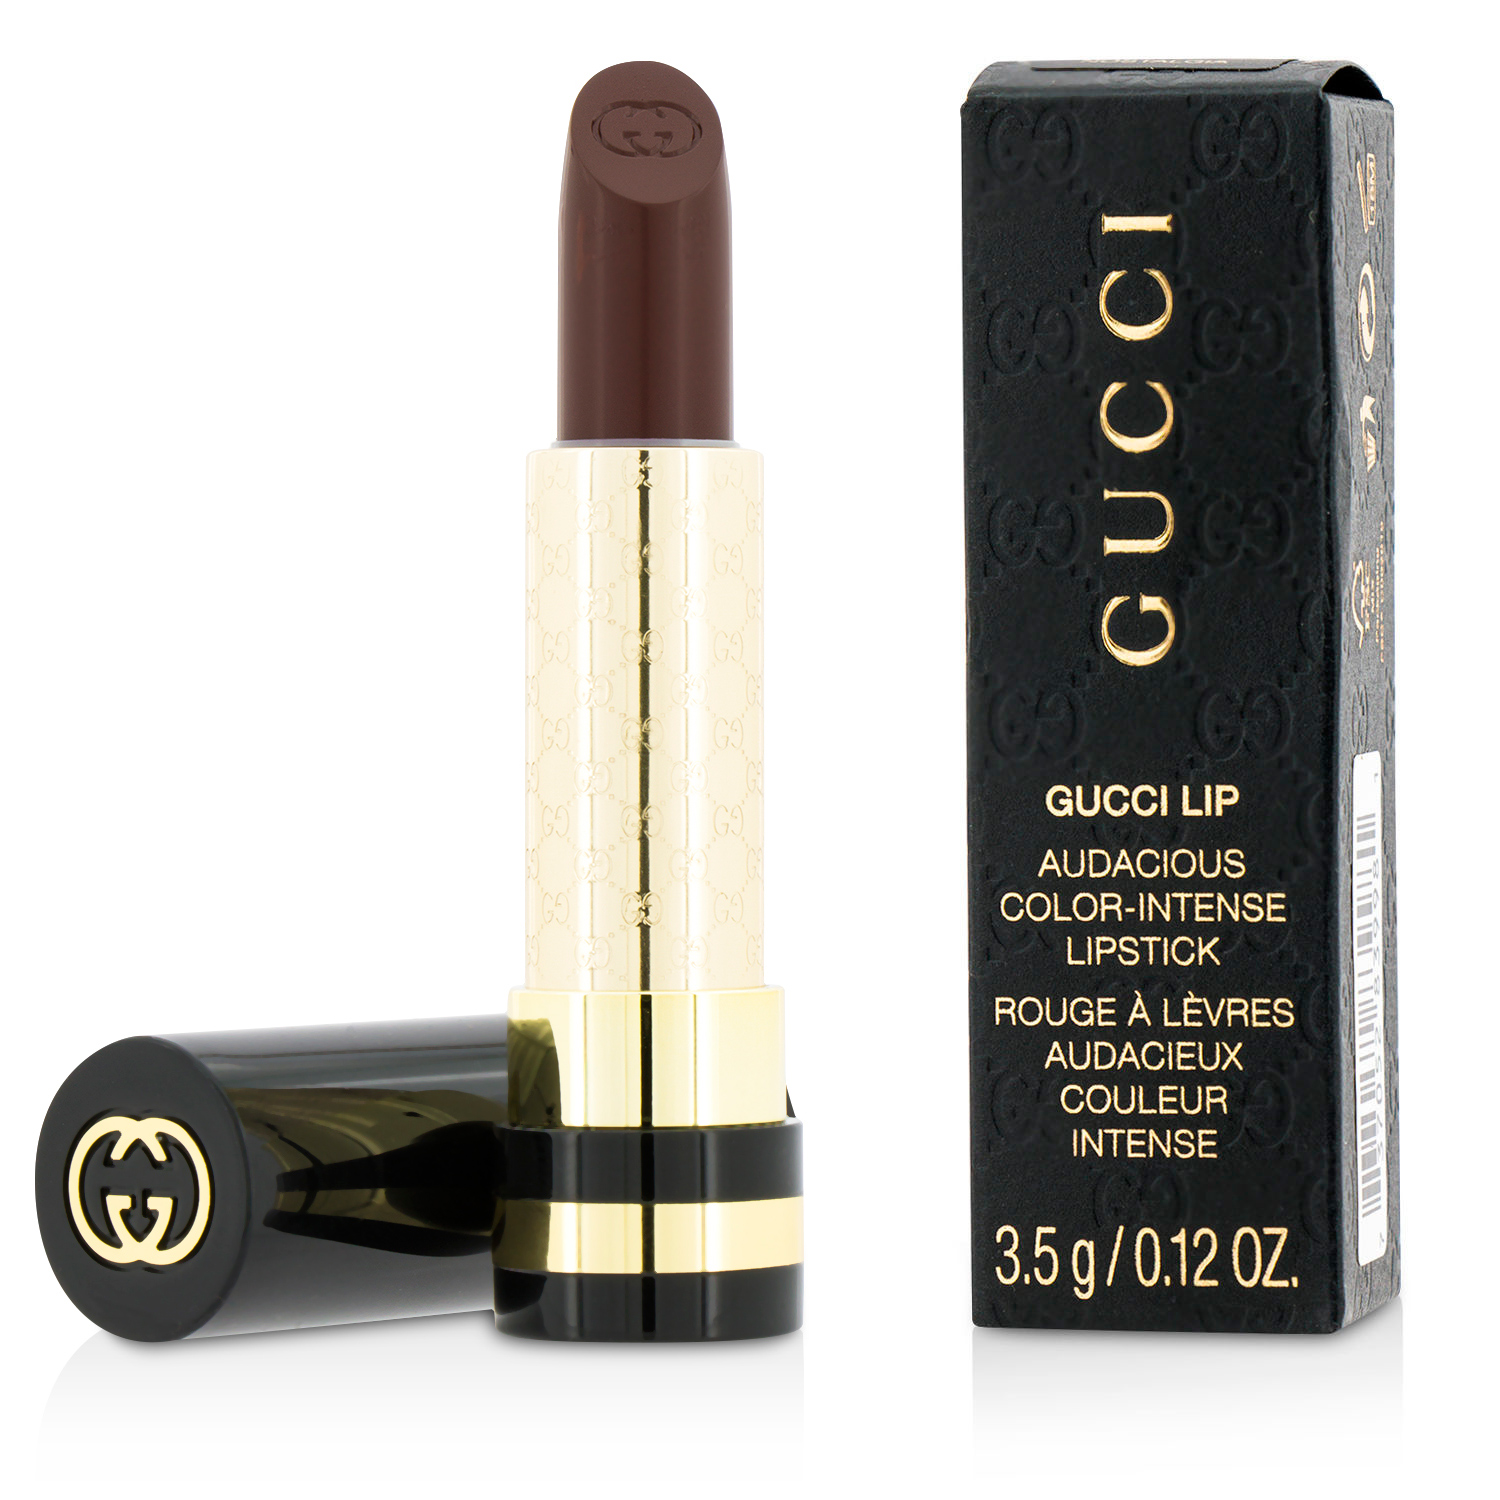 Audacious Color Intense Lipstick - #220 Imperial Red Gucci Image